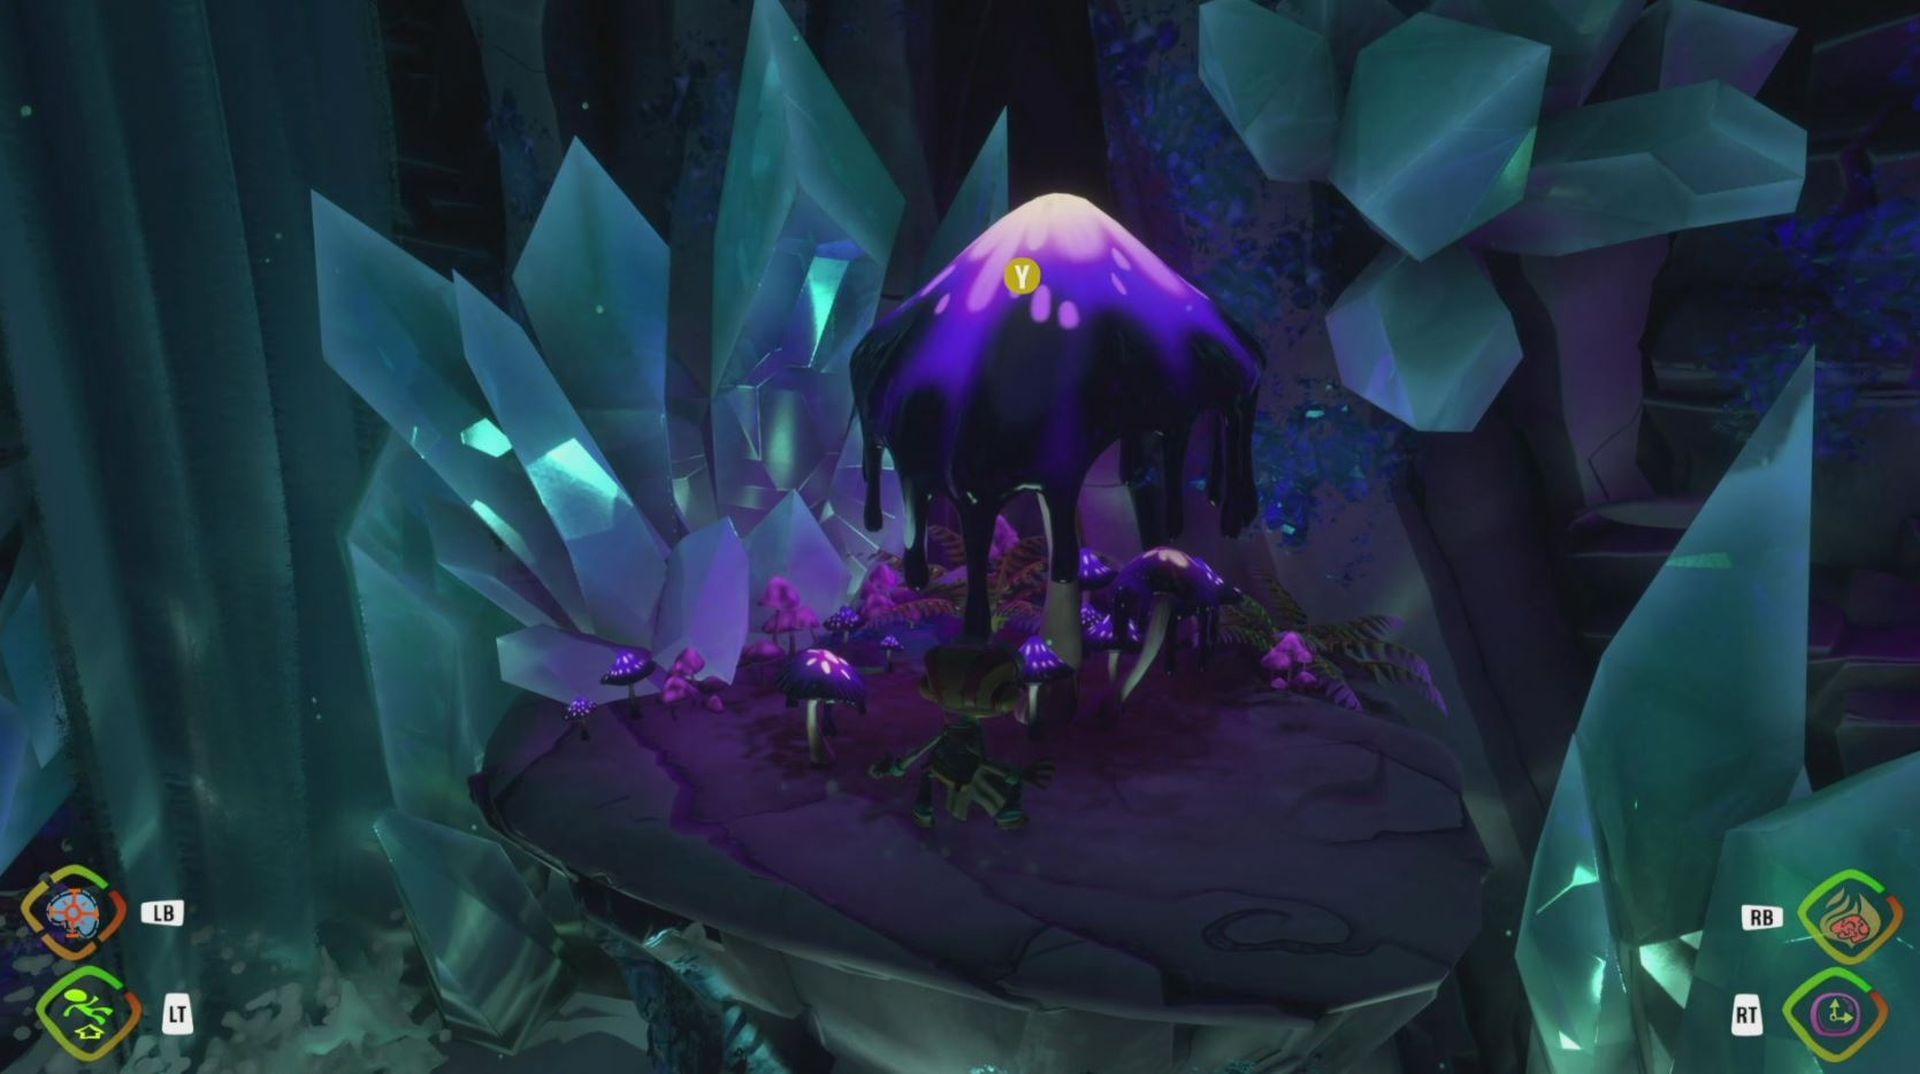 Psychonauts 2 rare fungus location: Raz can be seen standing in front of the Fungus Lili wants in a crystal-covered cave.